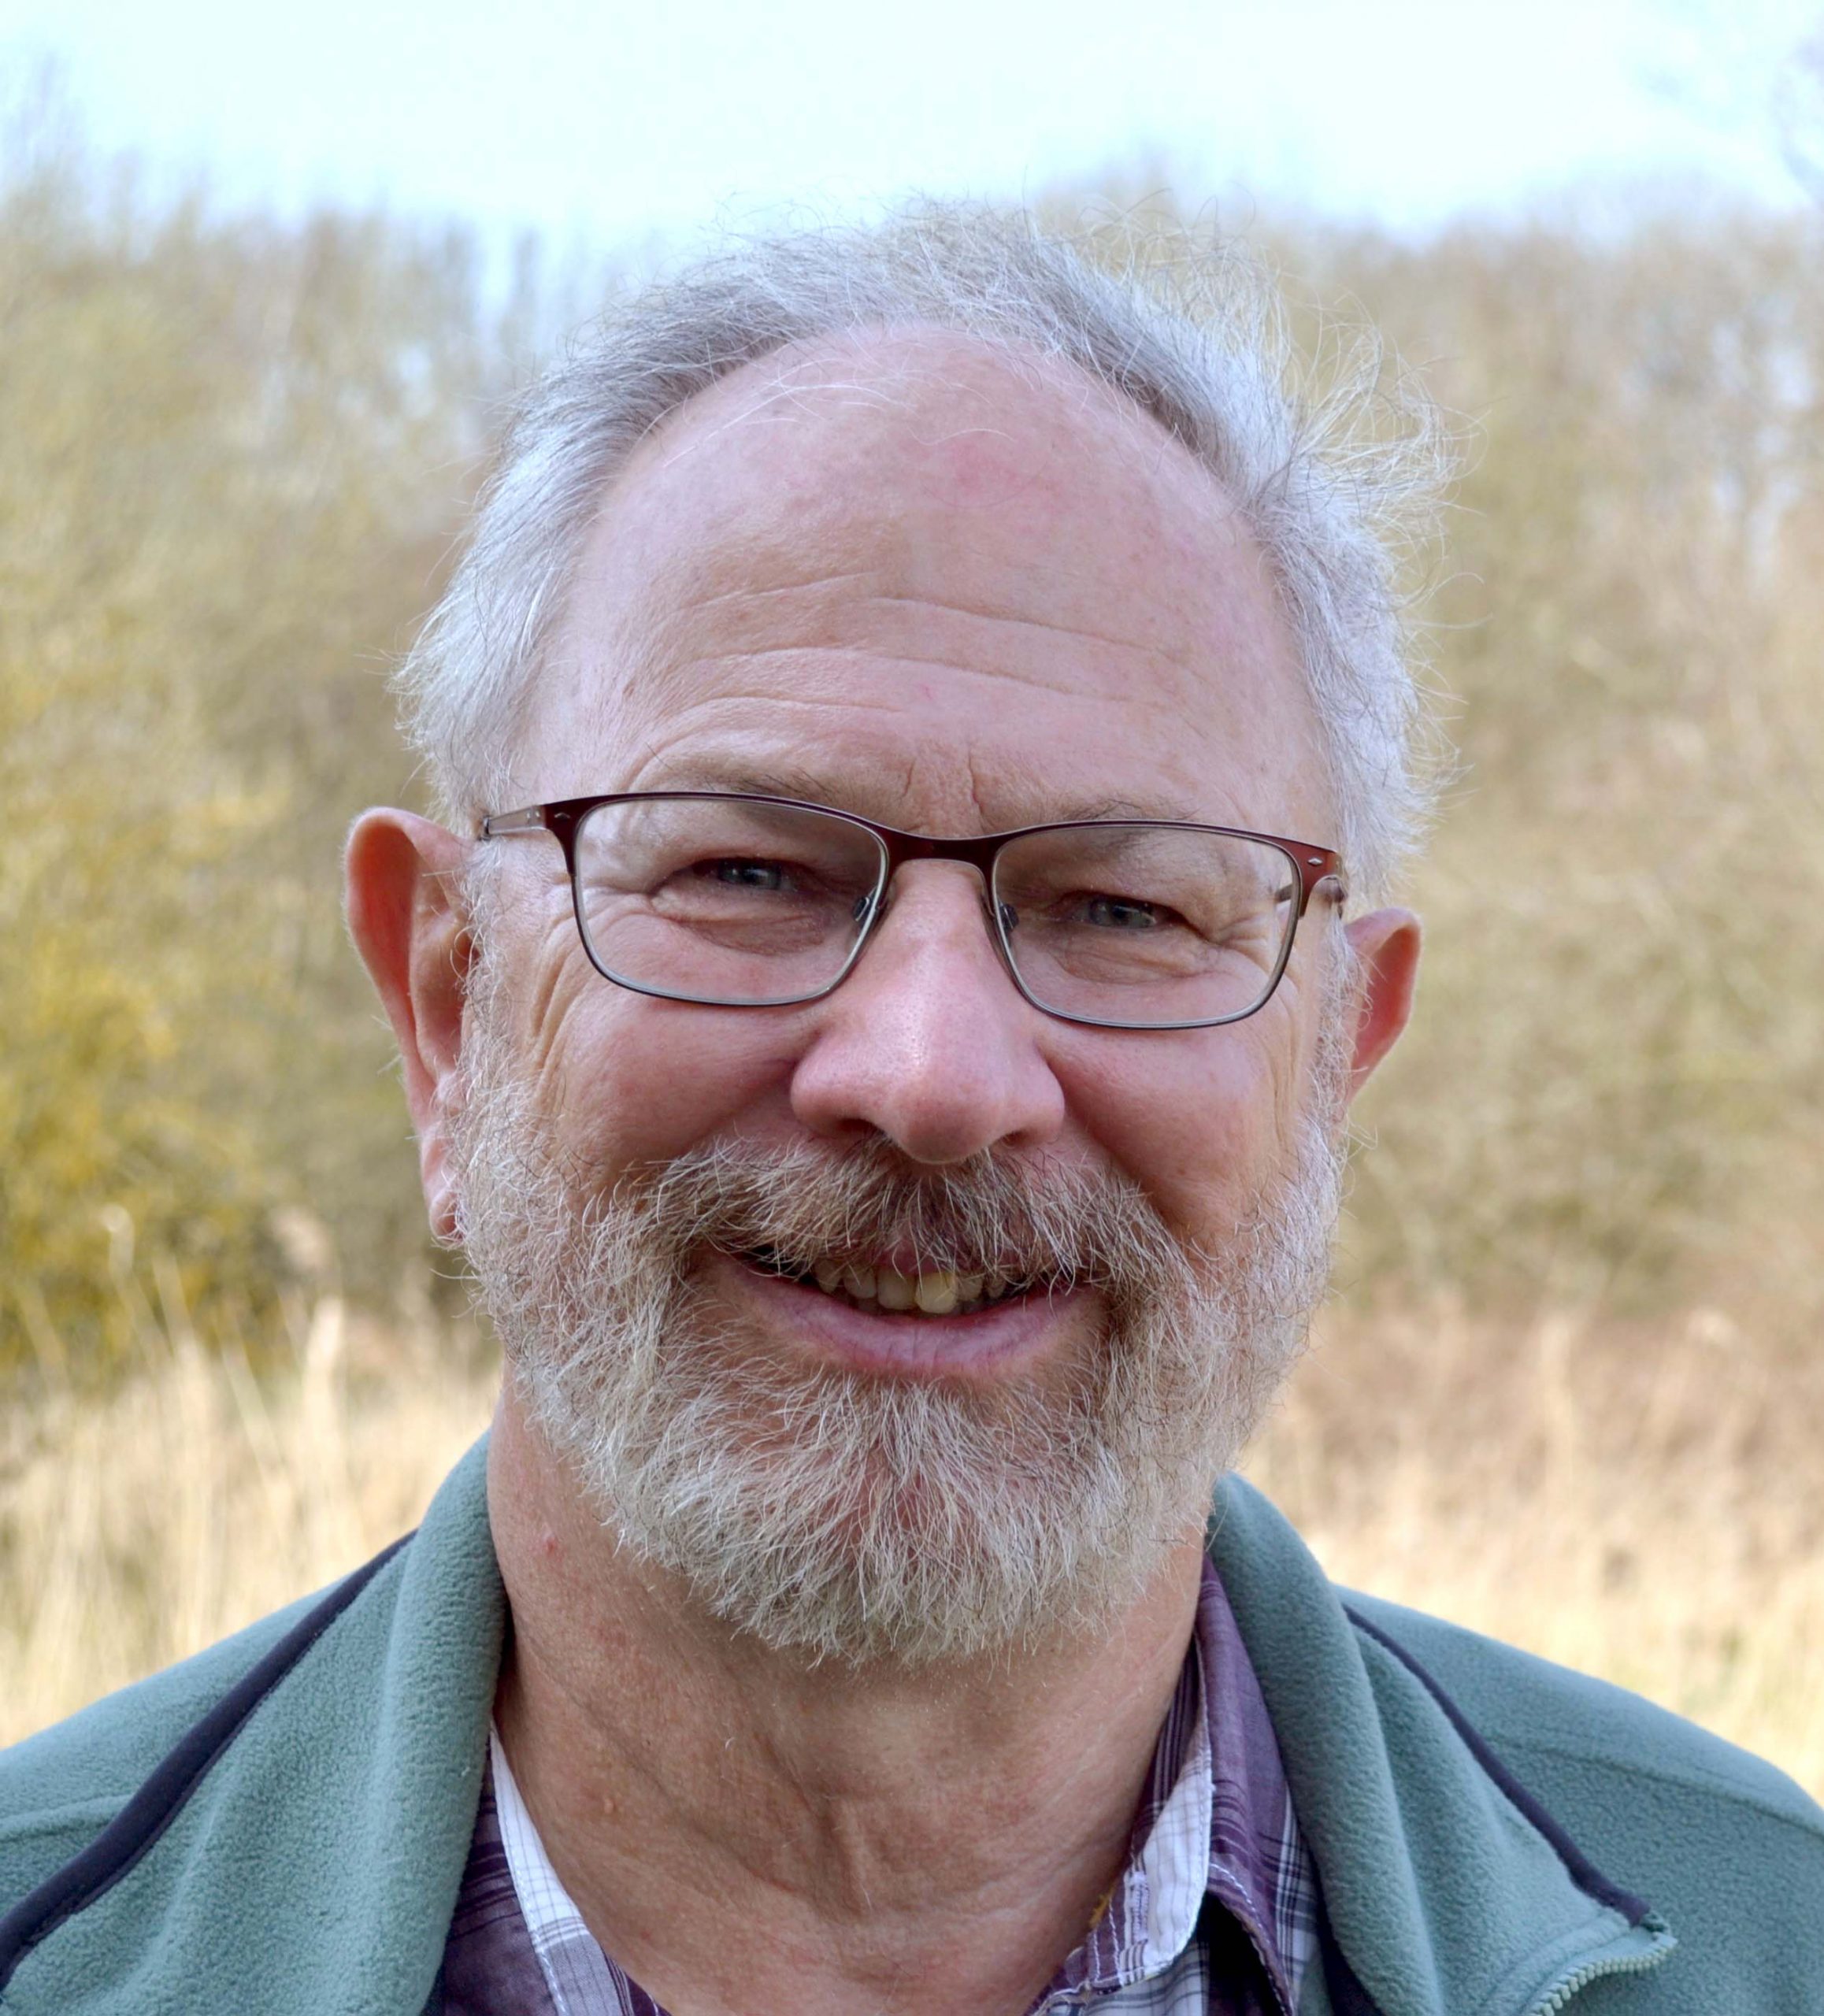 Head shot of Chris Mitchell. He is standing infront of a natural landscape, with short grey hair and a beard. He is wearing a blue coat.